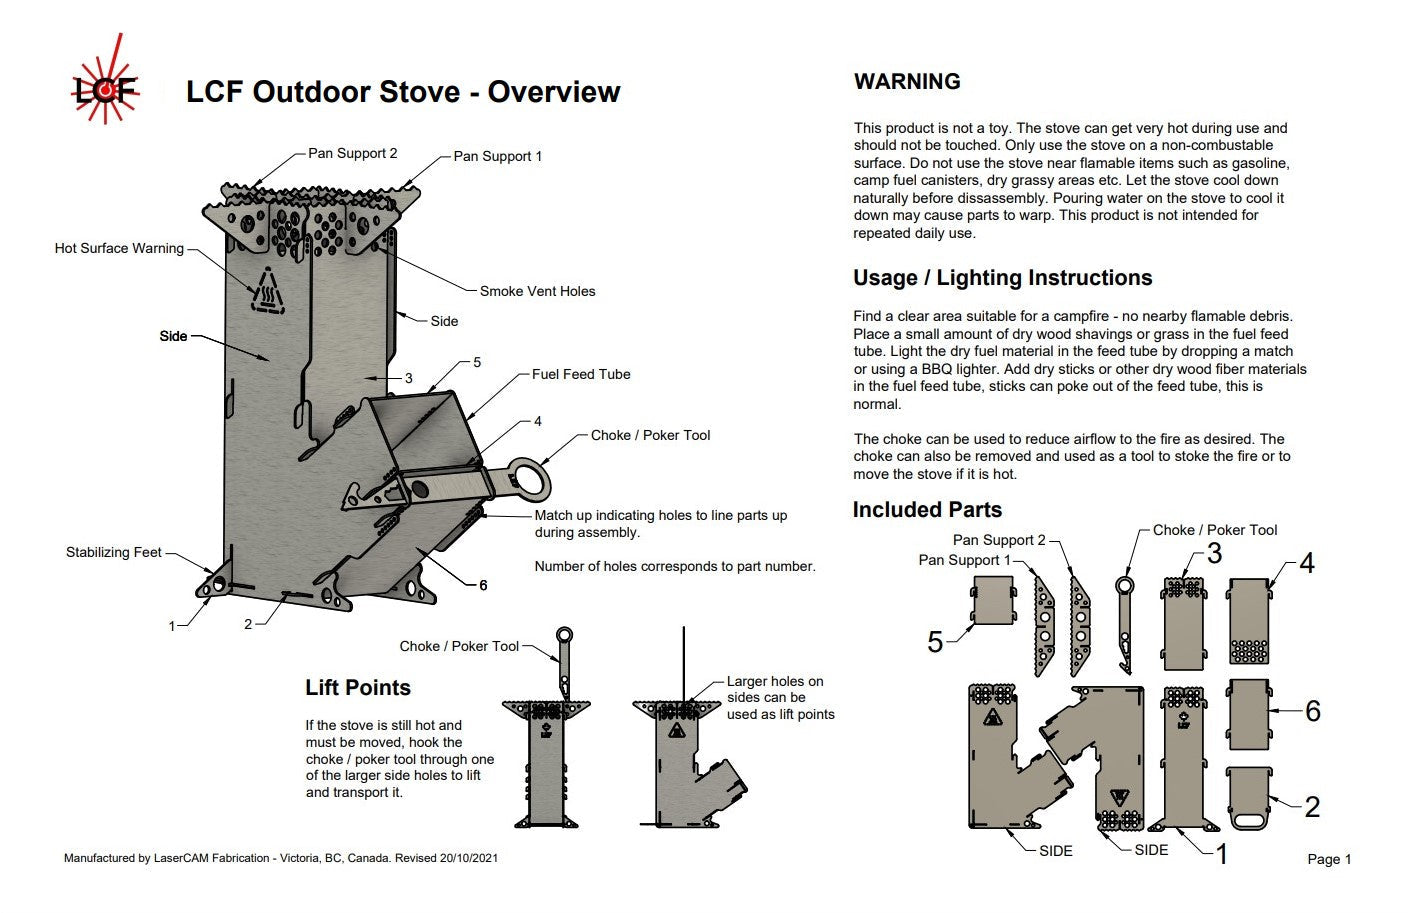 Rocket Camping Stove product details sheet. Includes detailed outline of pieces of the stove for assembly, warning information, usage and lighting and operational instructions. 